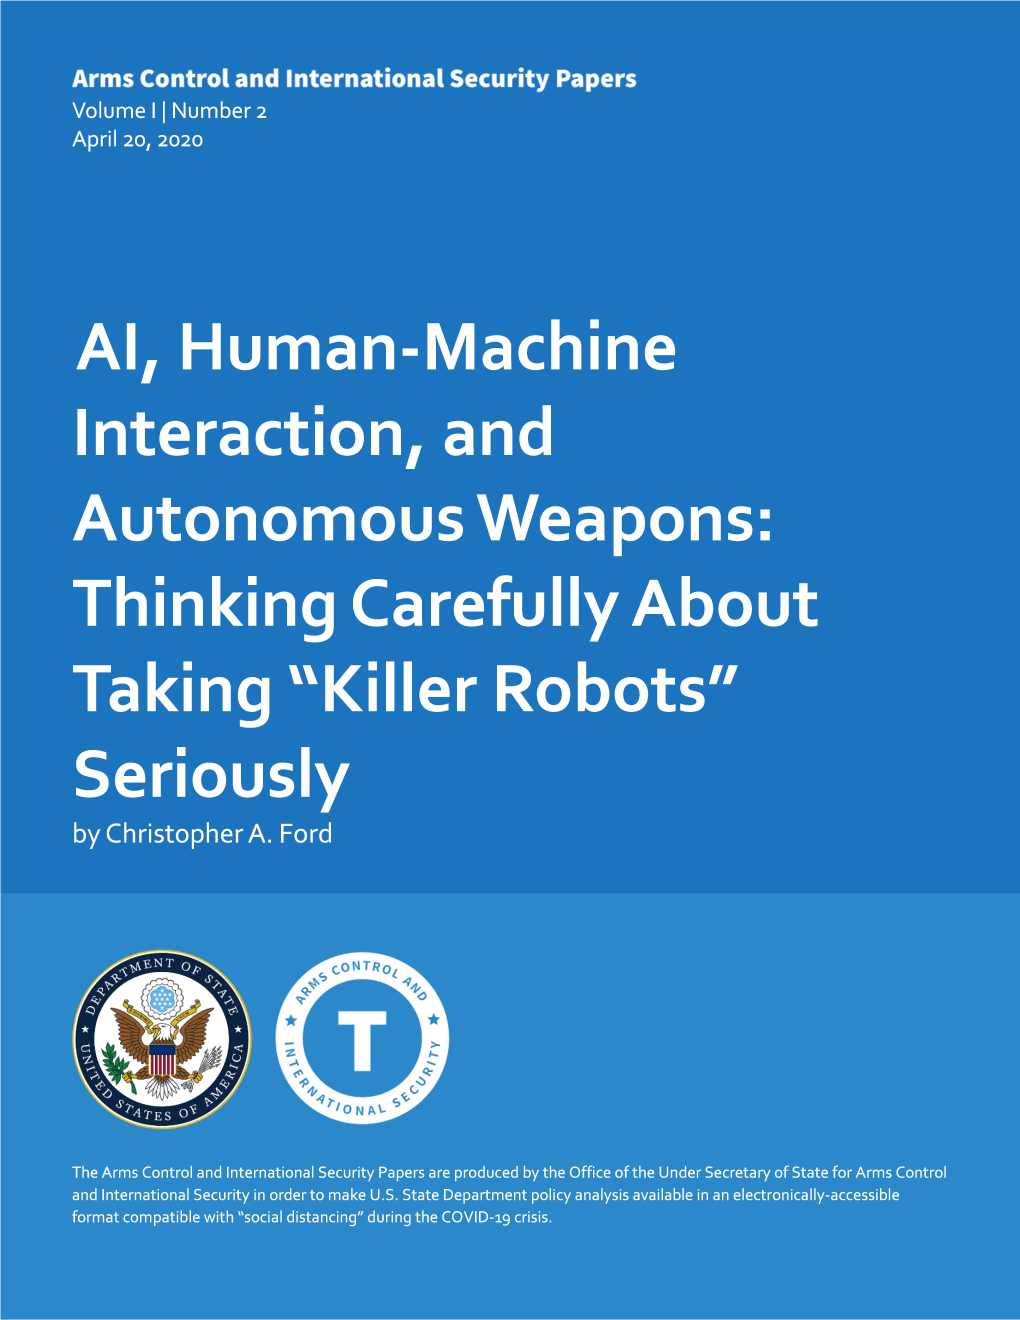 Al, Human-Machine Interaction, and Autonomous Weapons: Thinking Carefully About Taking "Killer Robots" Seriously by Christopher A